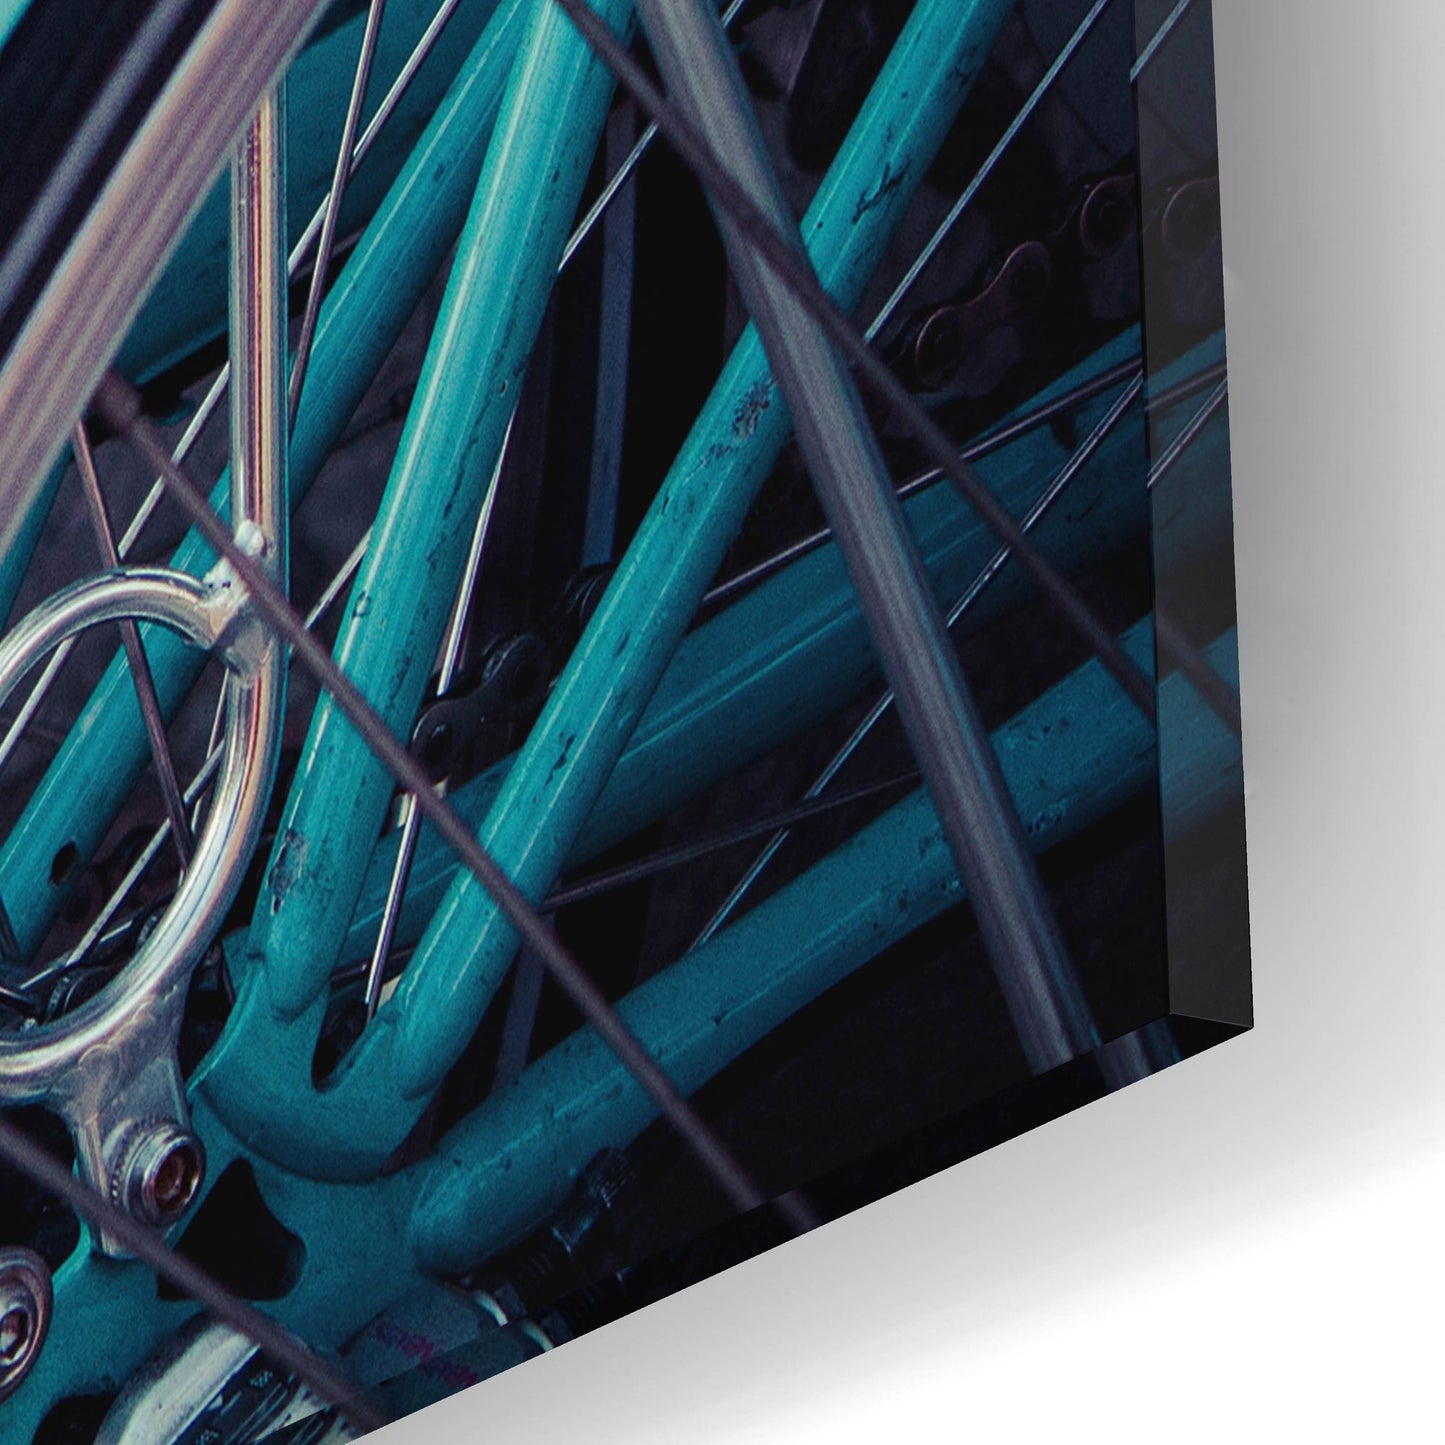 Epic Art ' Bicycle Line Up 2' by Jessica Reiss, Acrylic Glass Wall Art,16x12